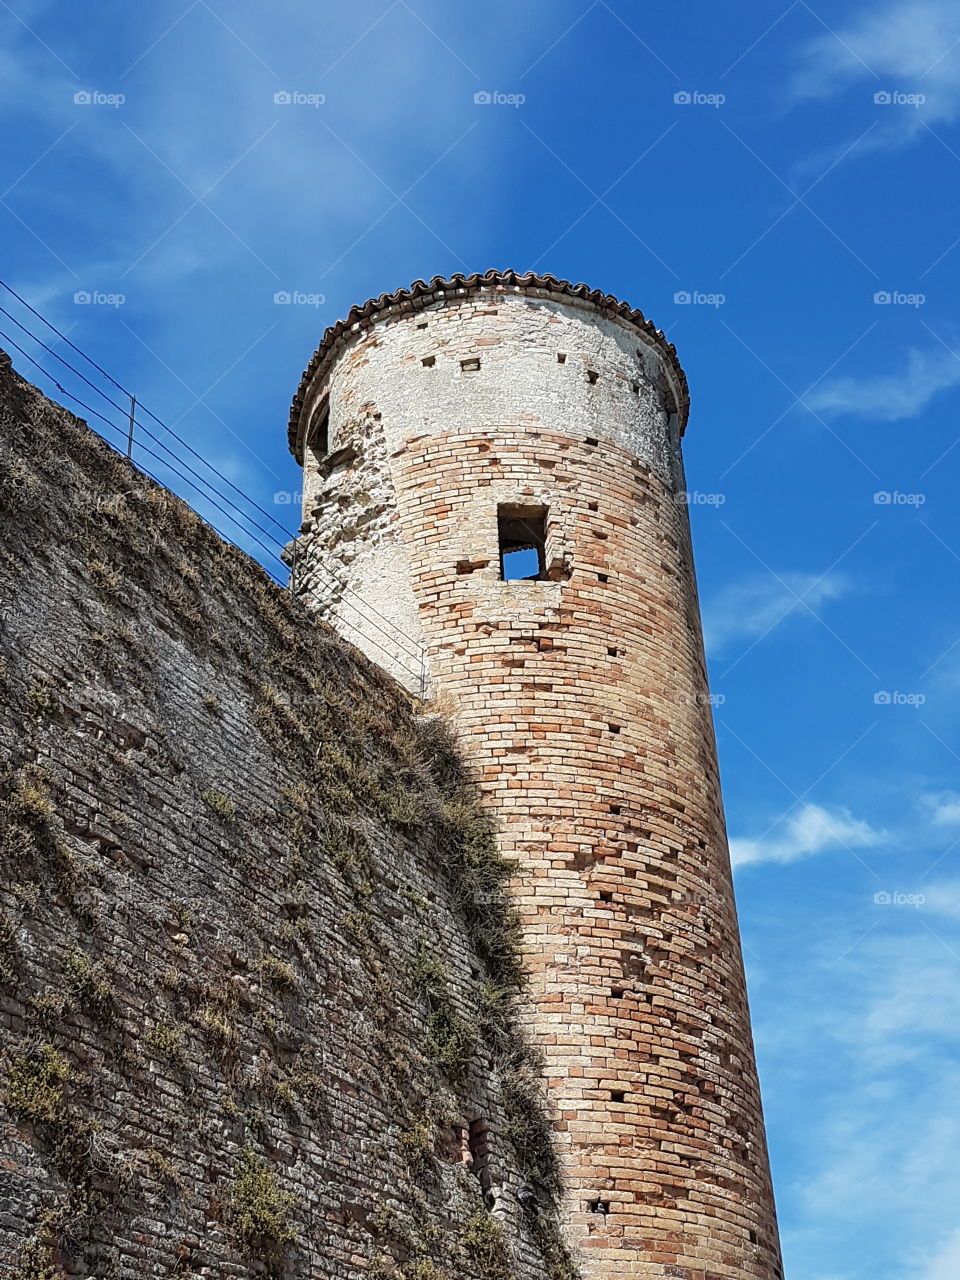 Tower of a medieval italian castle with blue sky